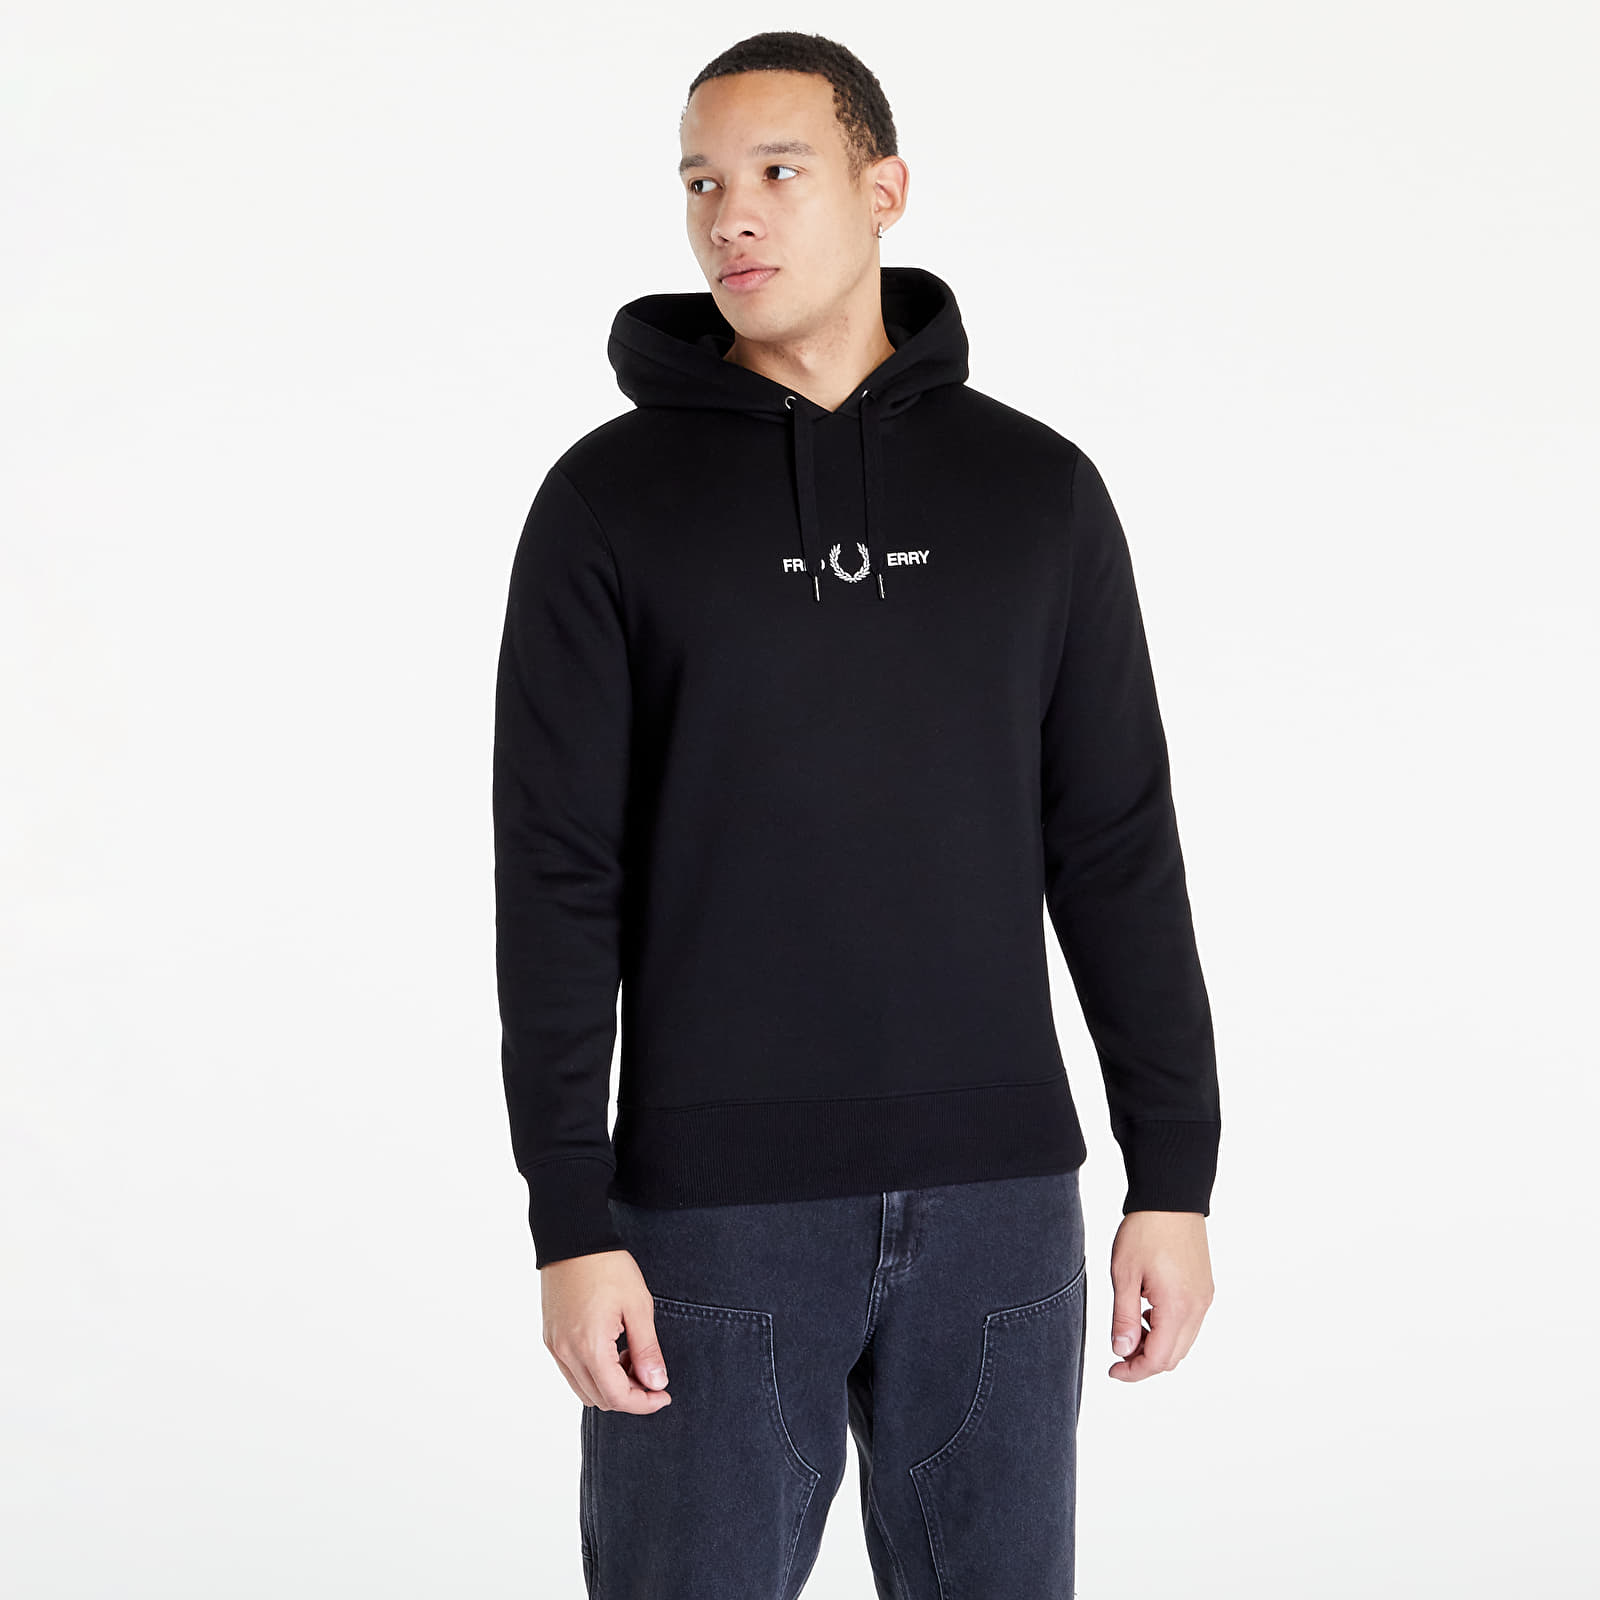 Hanorace FRED PERRY Embroidered Hooded Sweatshirt Black